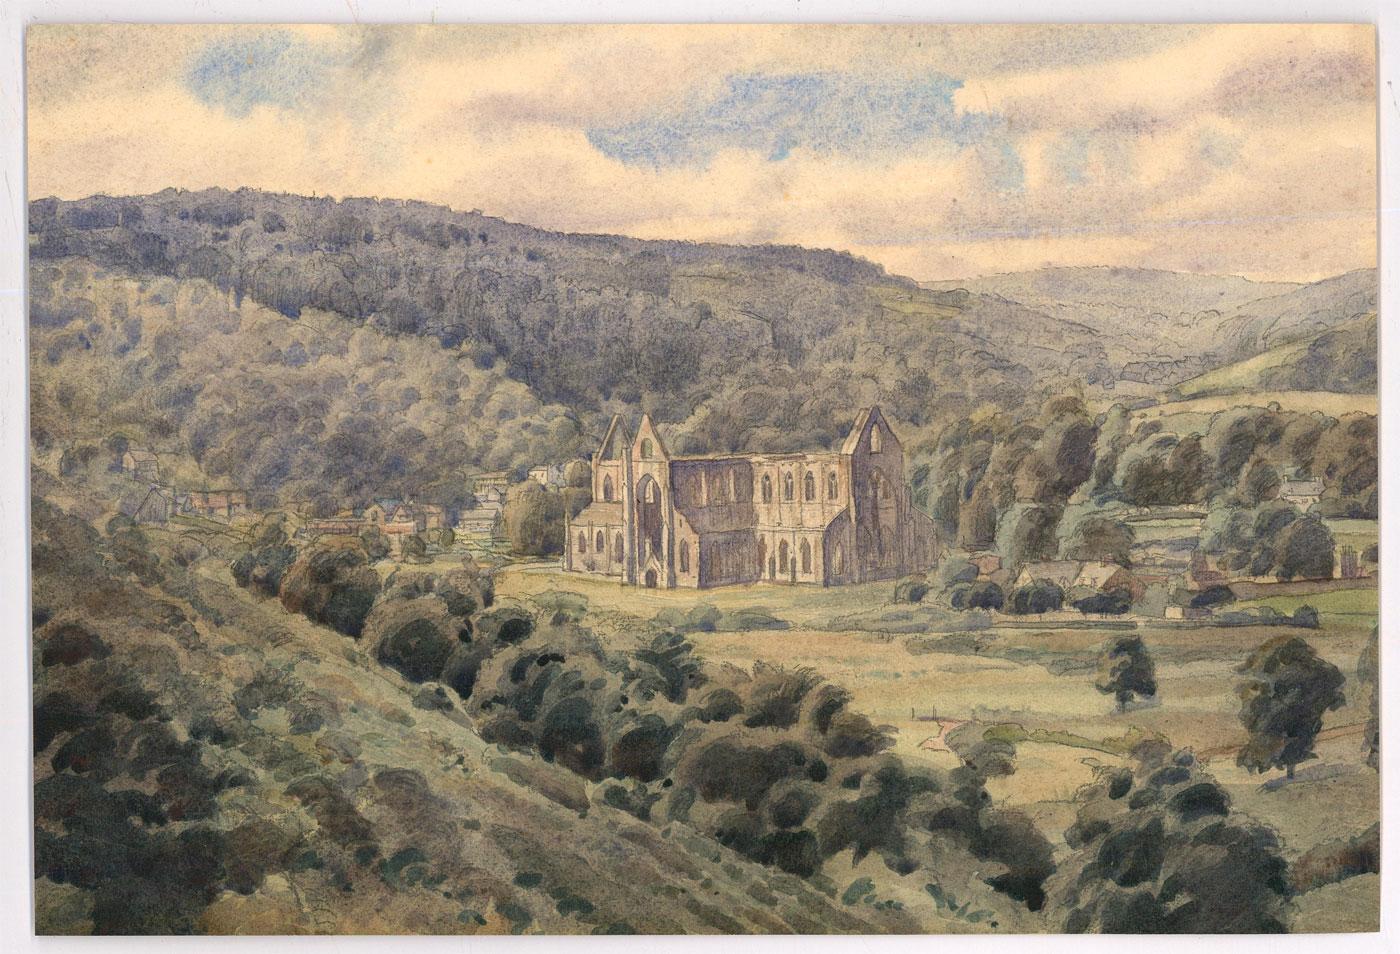 A fine topographical view of Tintern Abbey and the surrounding landscape. The painting is unsigned, however the original frame it was removed from was signed by the artist's wife, G. Muriel Tucker. The painting's graphic line work over watercolour